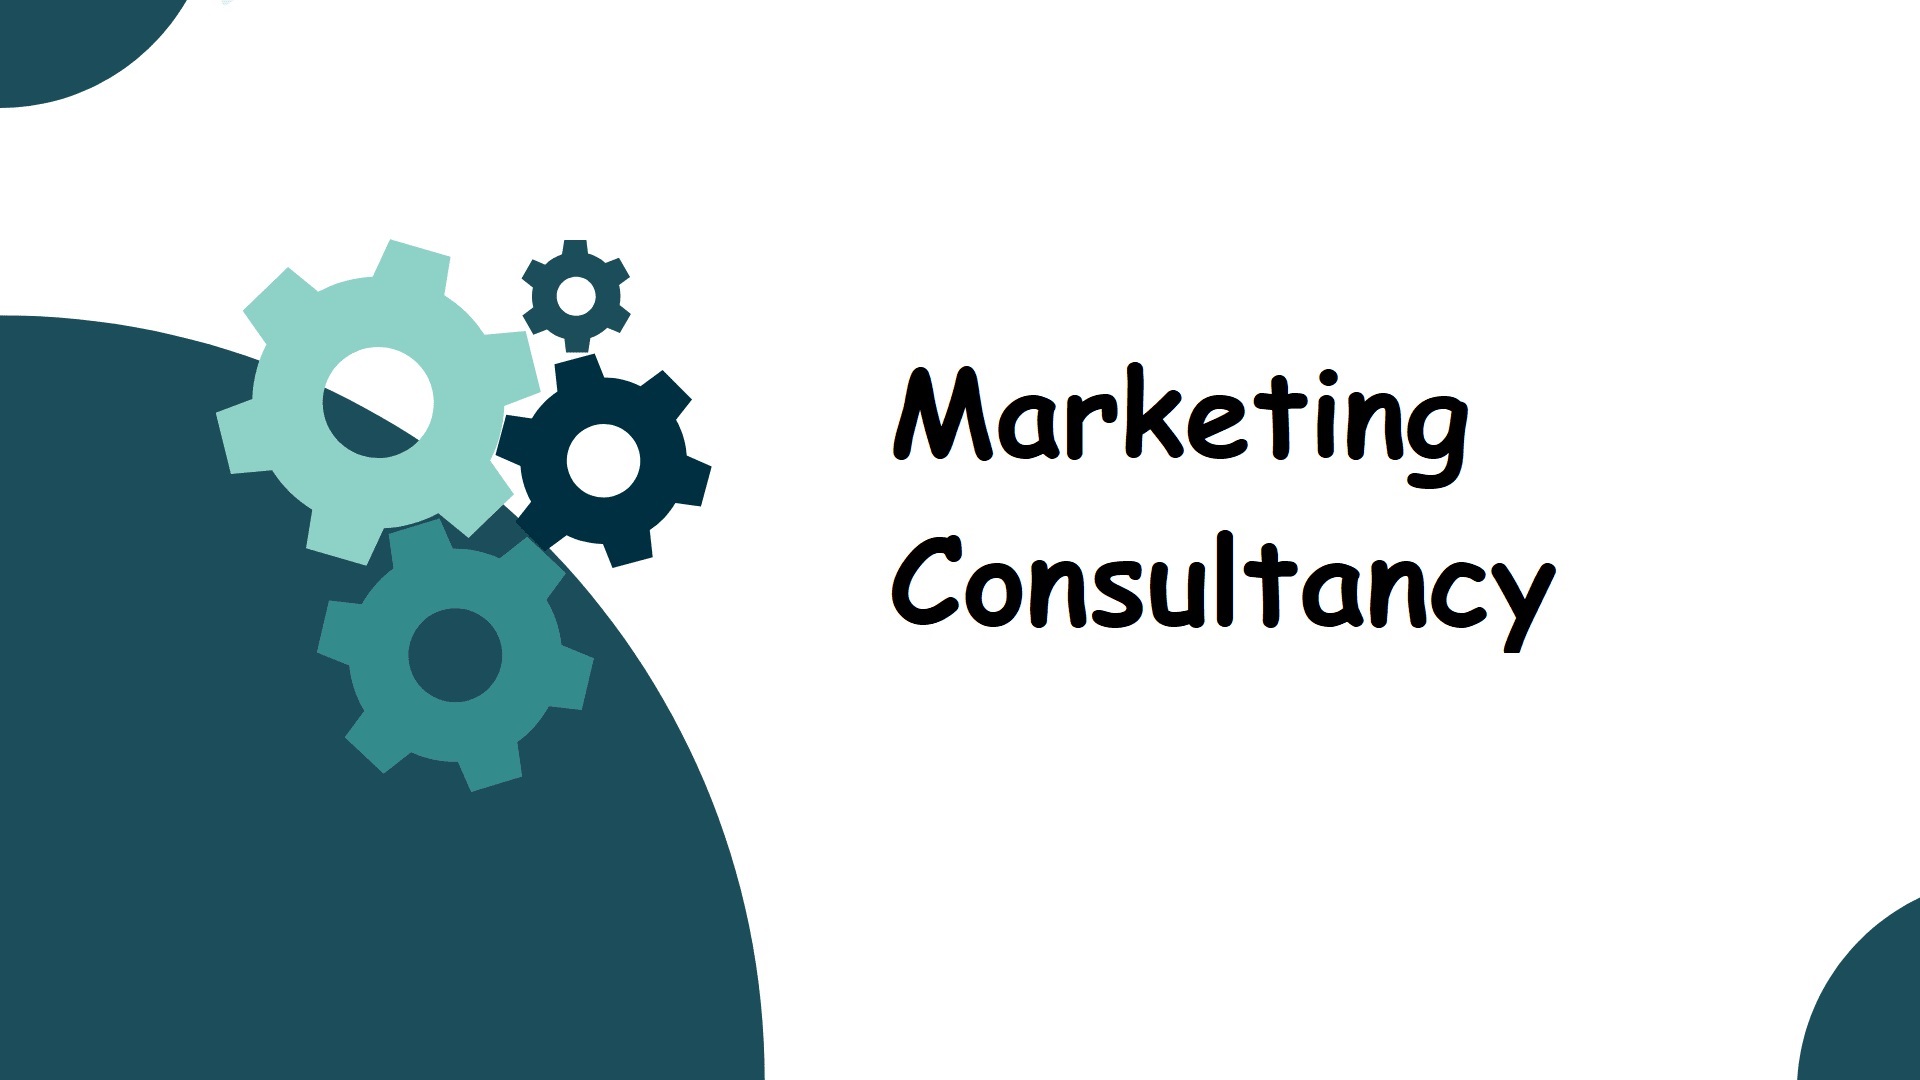 marketing consultancy professionals, marketing consulting firms in india, marketing consultancy, marketing consulting services, indian marketing consultants, marketing solutions, marketing planning, marketing and sales strategy, market research firms, marketing planning and execution, marketing communications, market segmentation analysis, marketing campaign management, marketing budget management, marketing performance metrics, marketing strategy development, marketing consulting agencies, marketing outsourcing services, marketing performance analytics, marketing trends in india, marketing management consulting, marketing strategy consulting firms